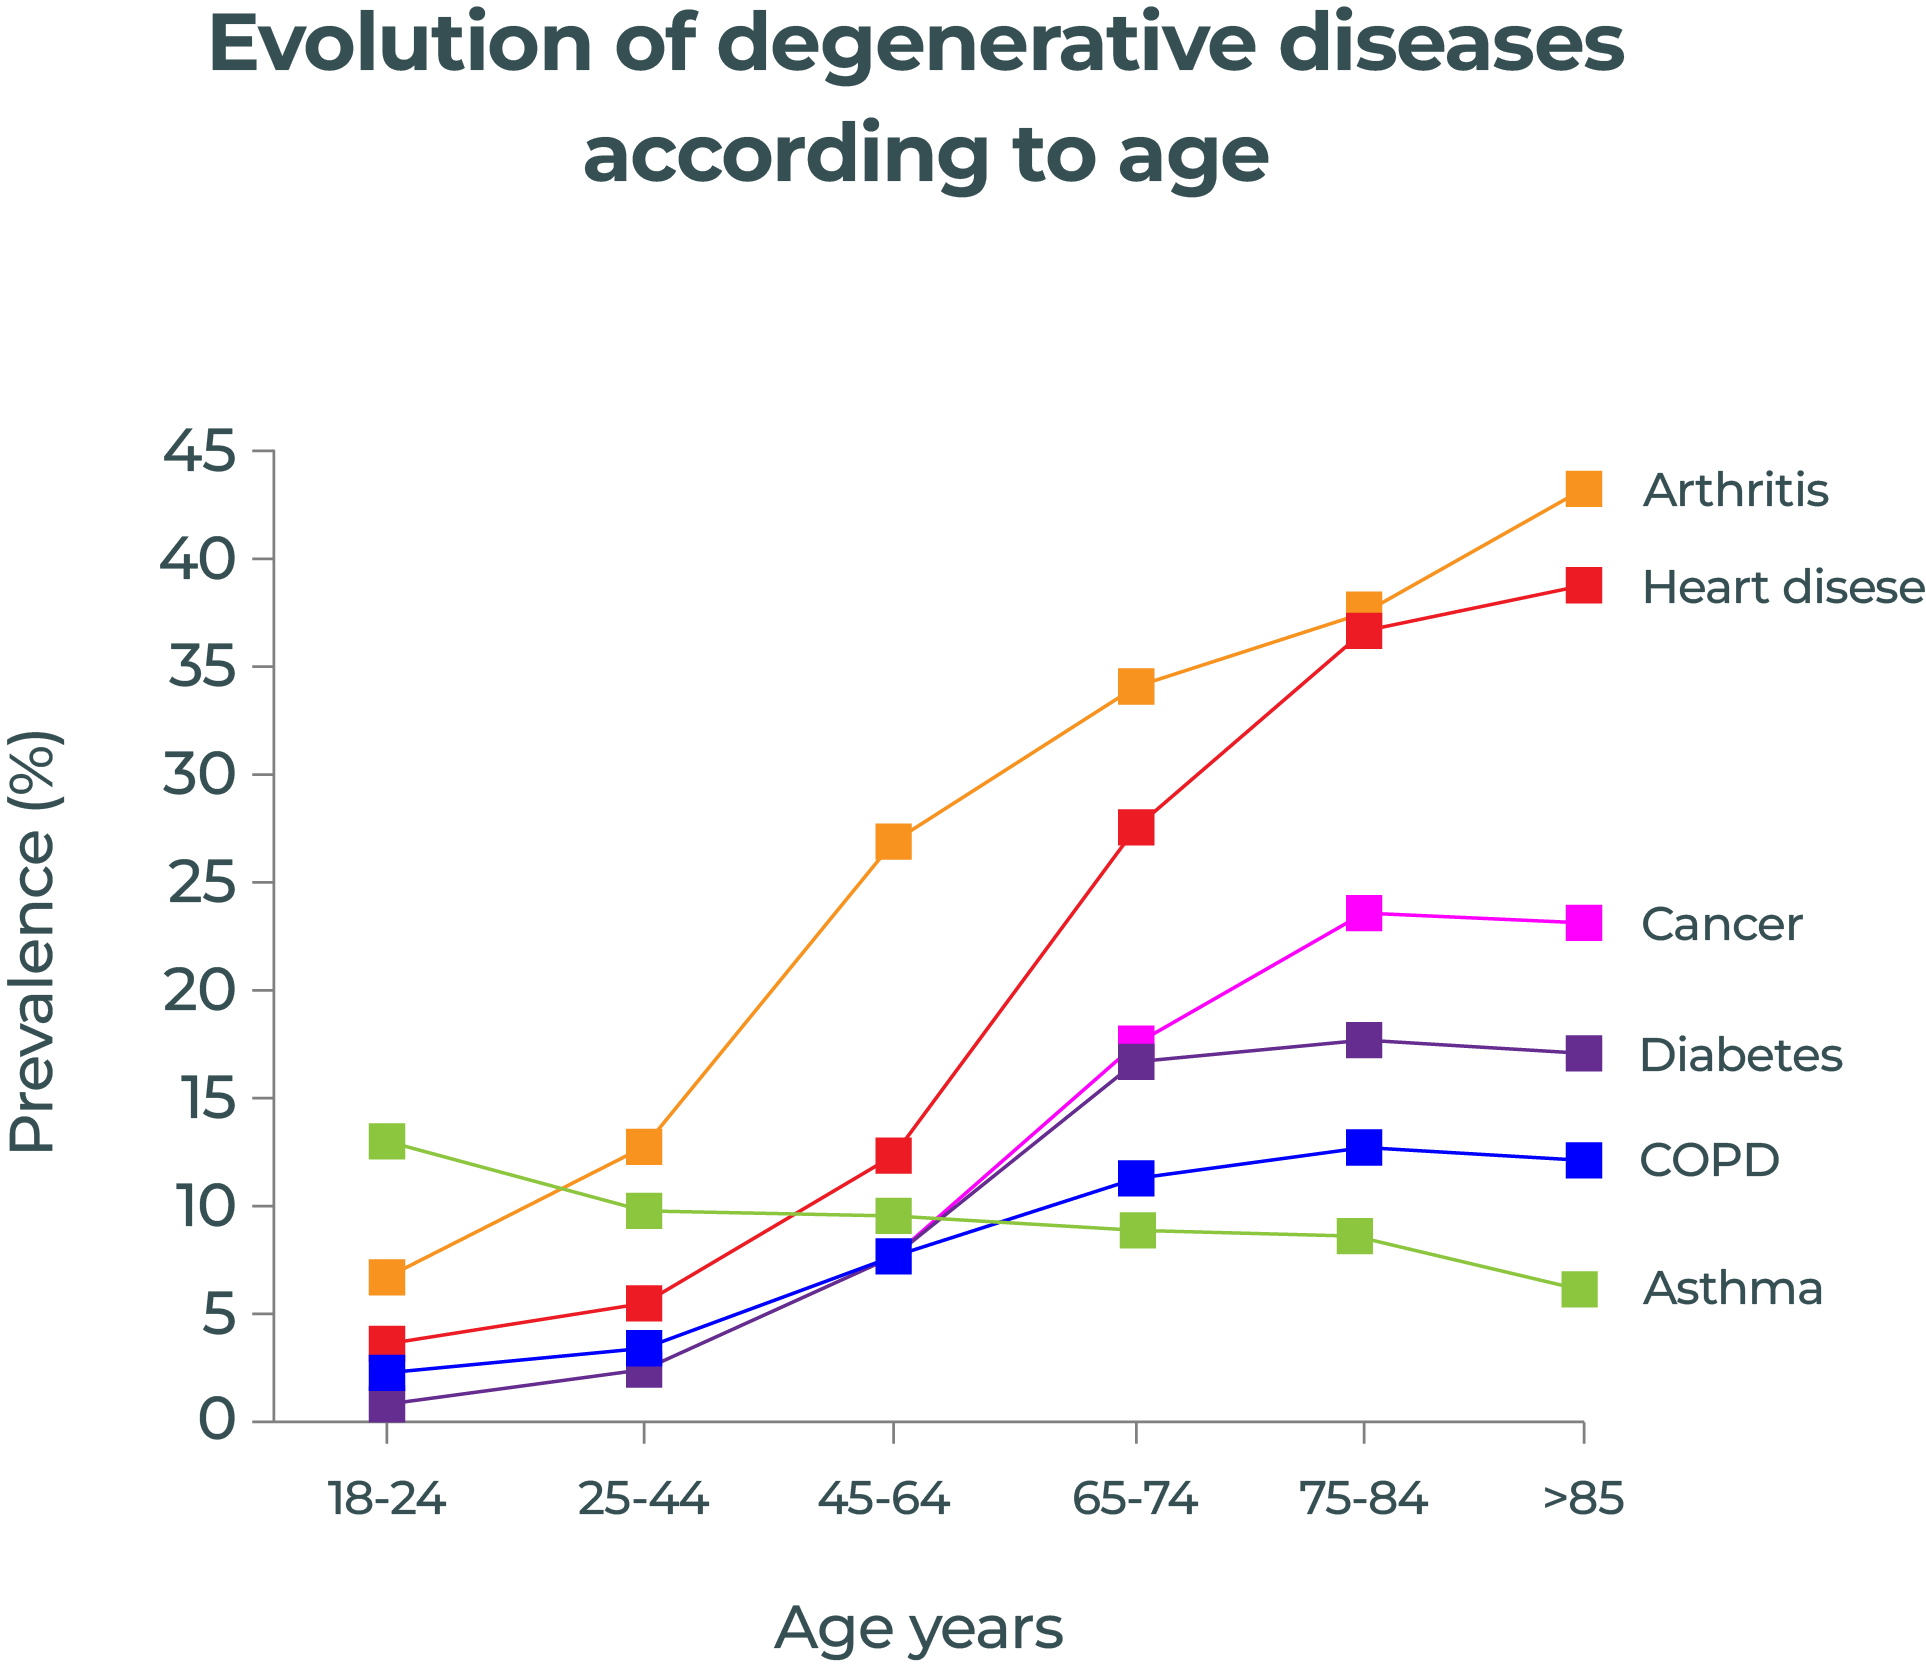 Advancement of degenerative diseases is associated with advancing age